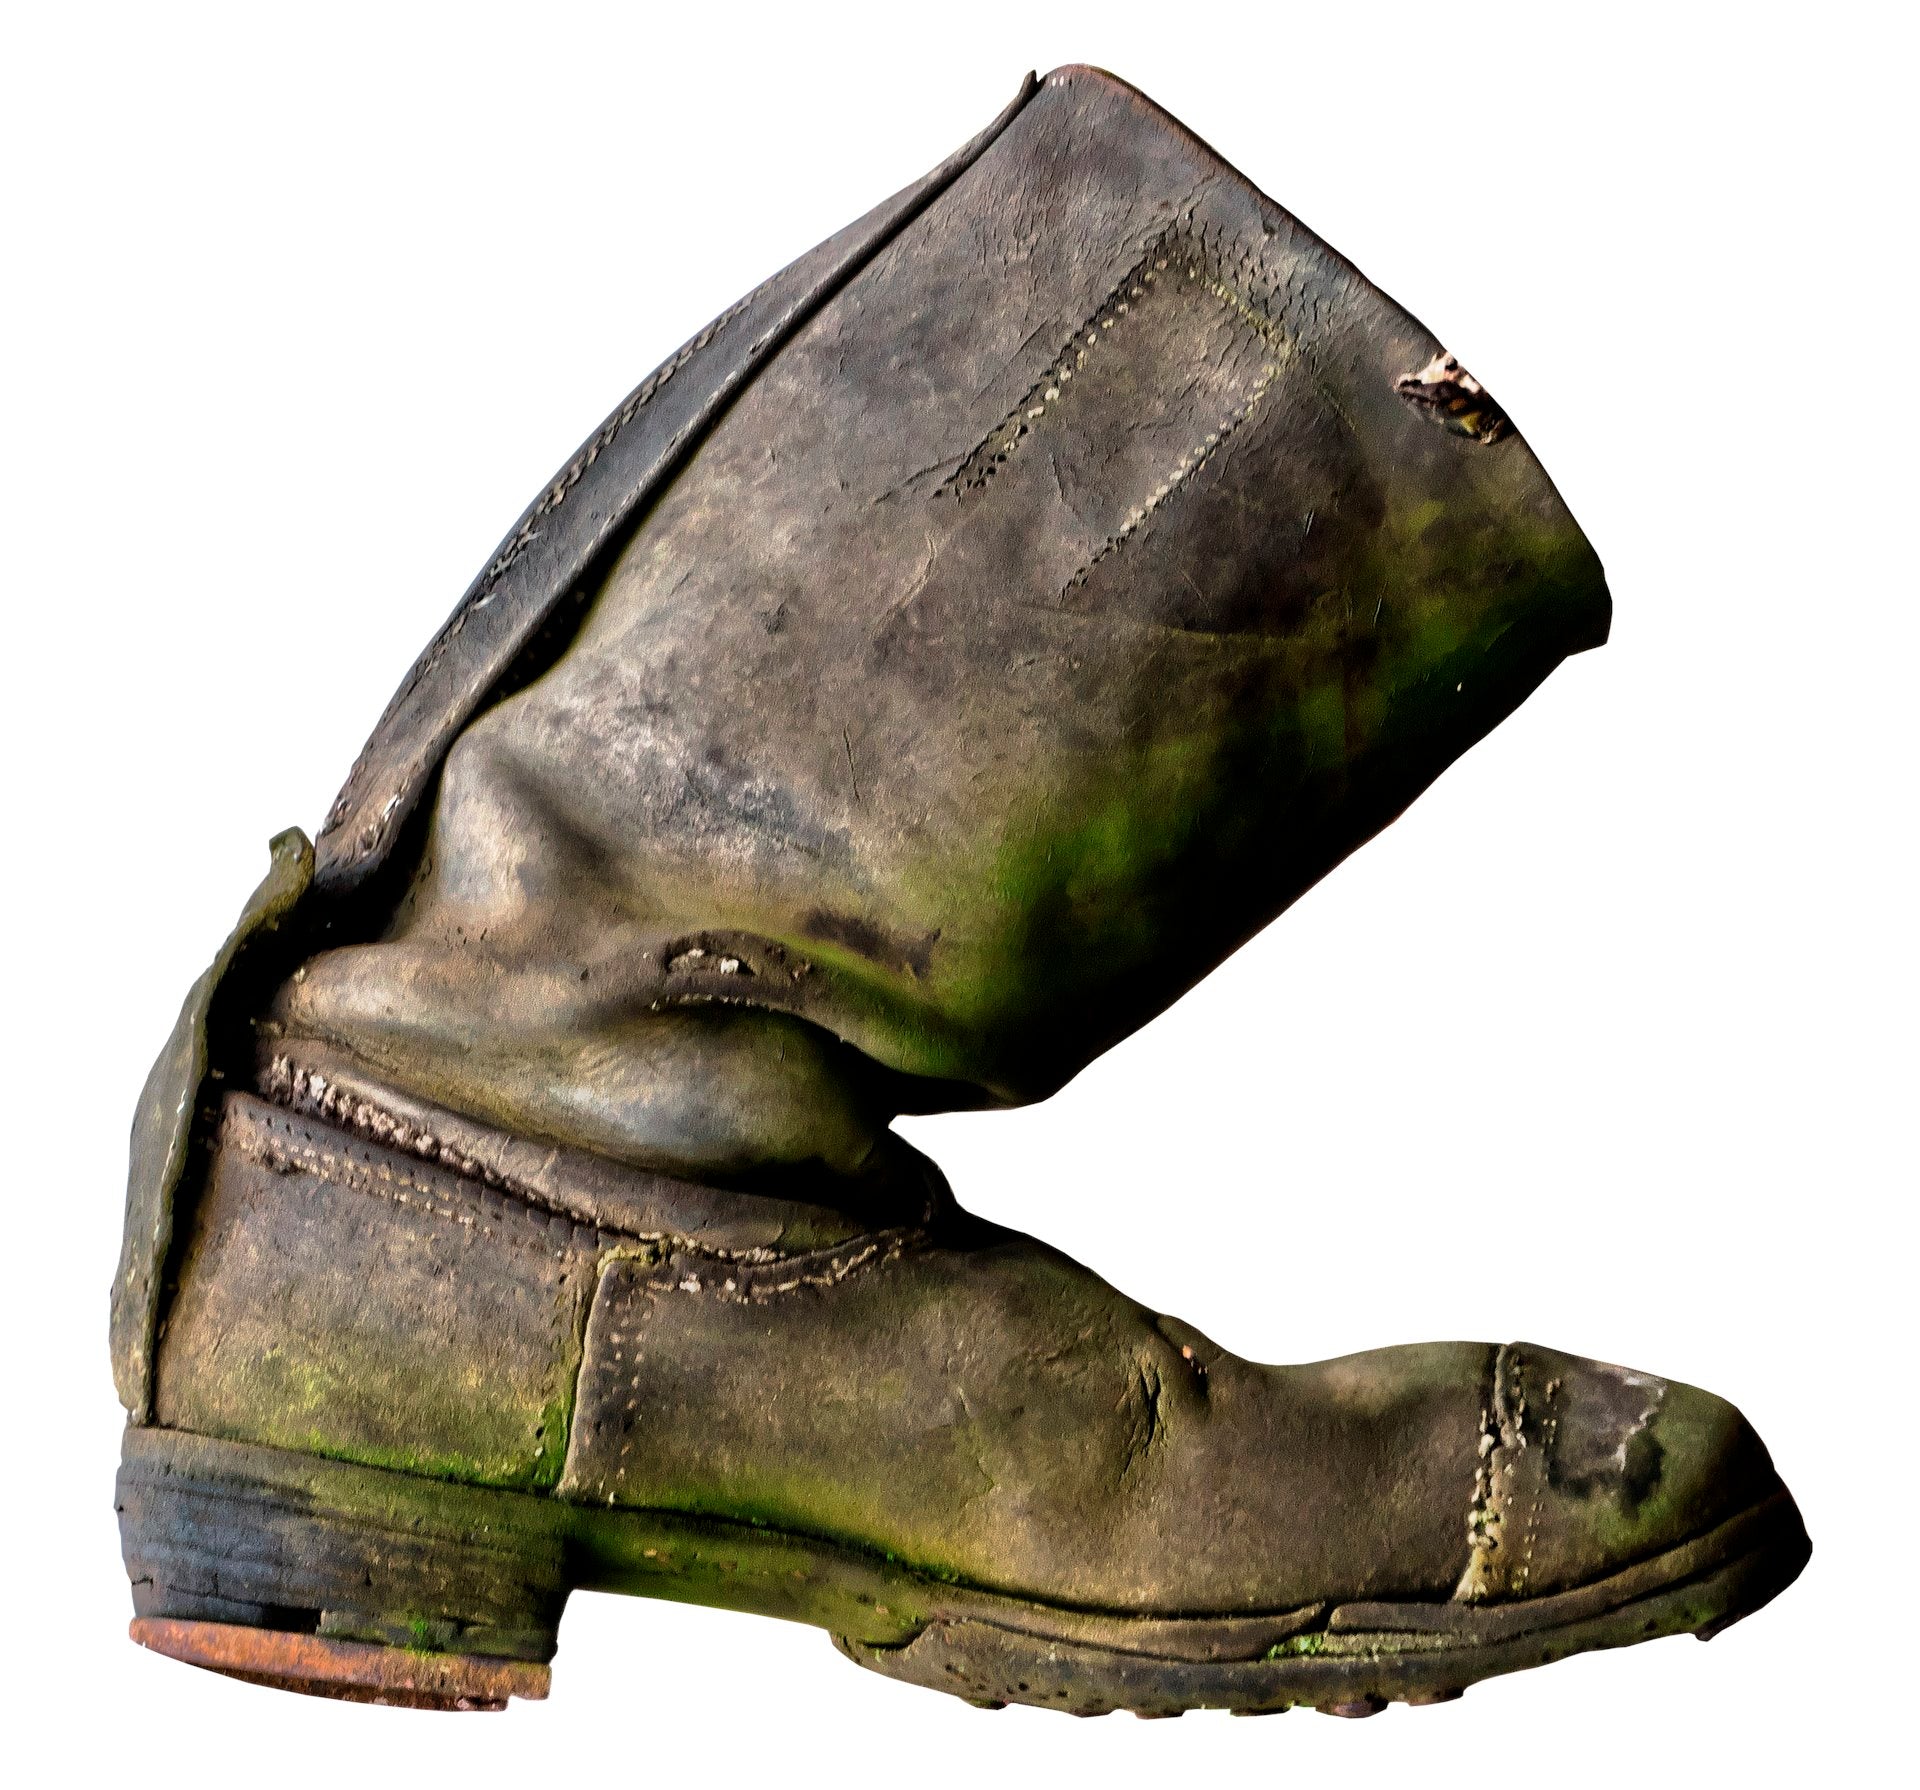 Does Water Ruin Leather Boots?